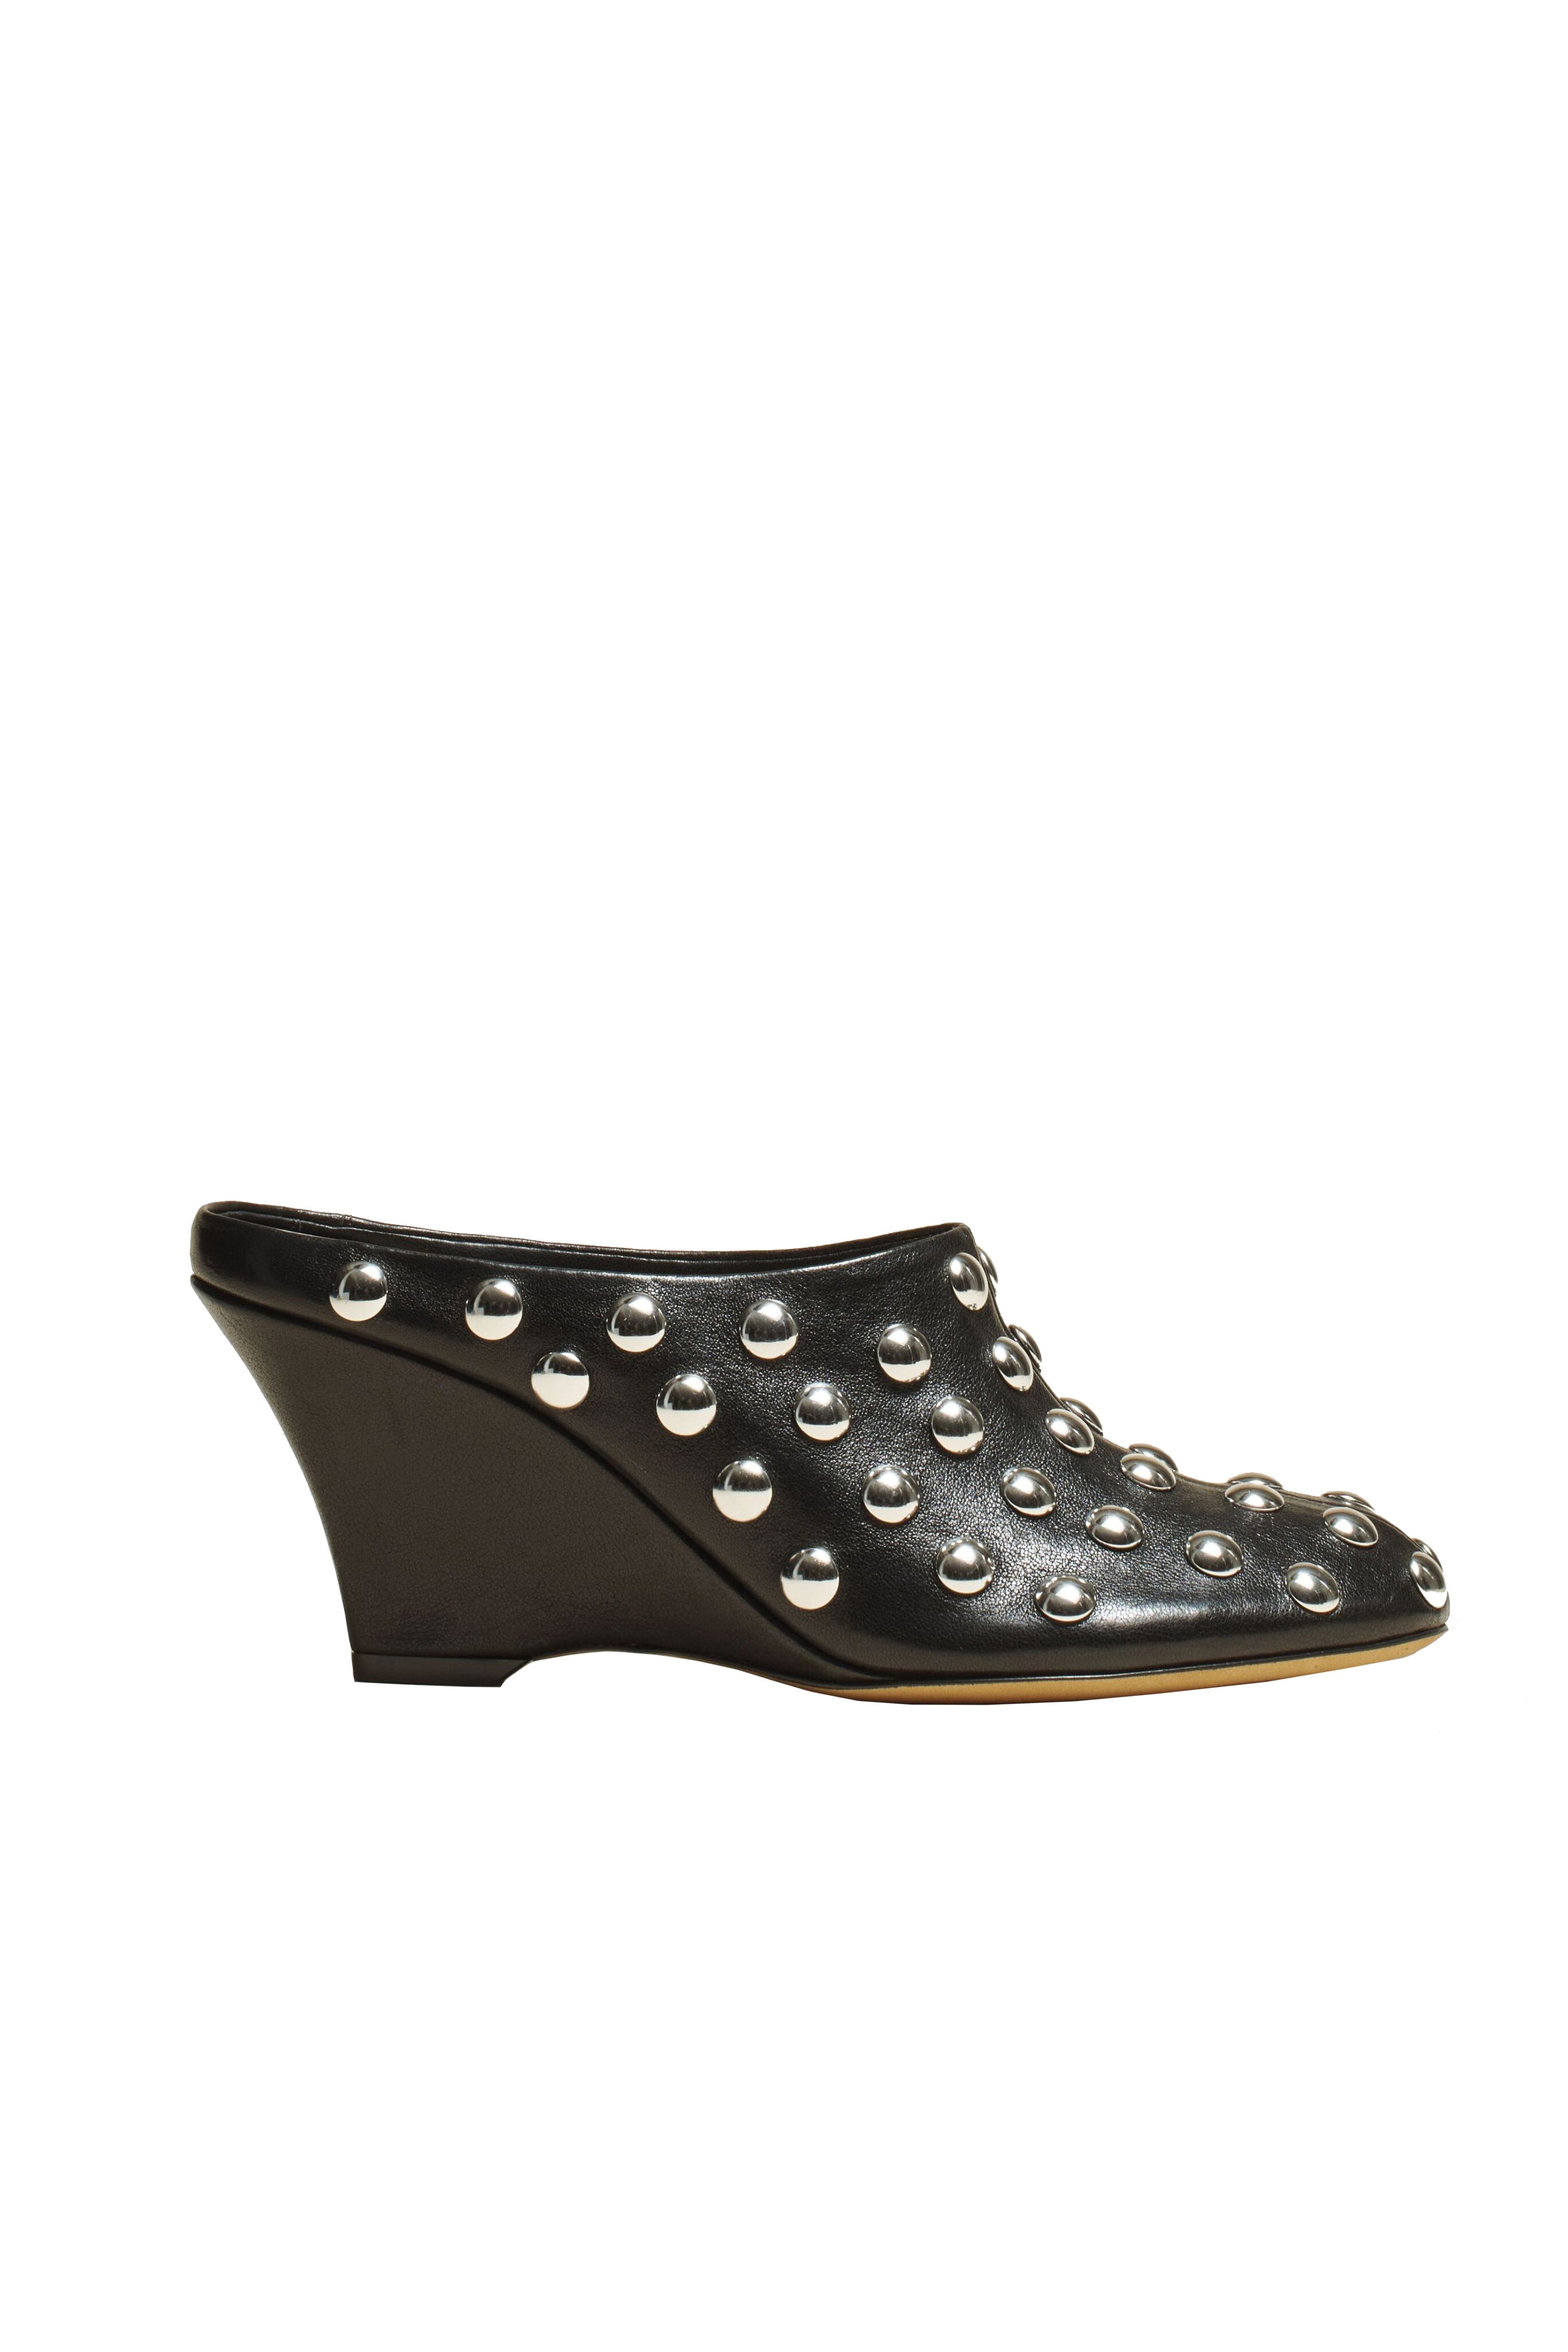 Apollo Studded Wedge Mules